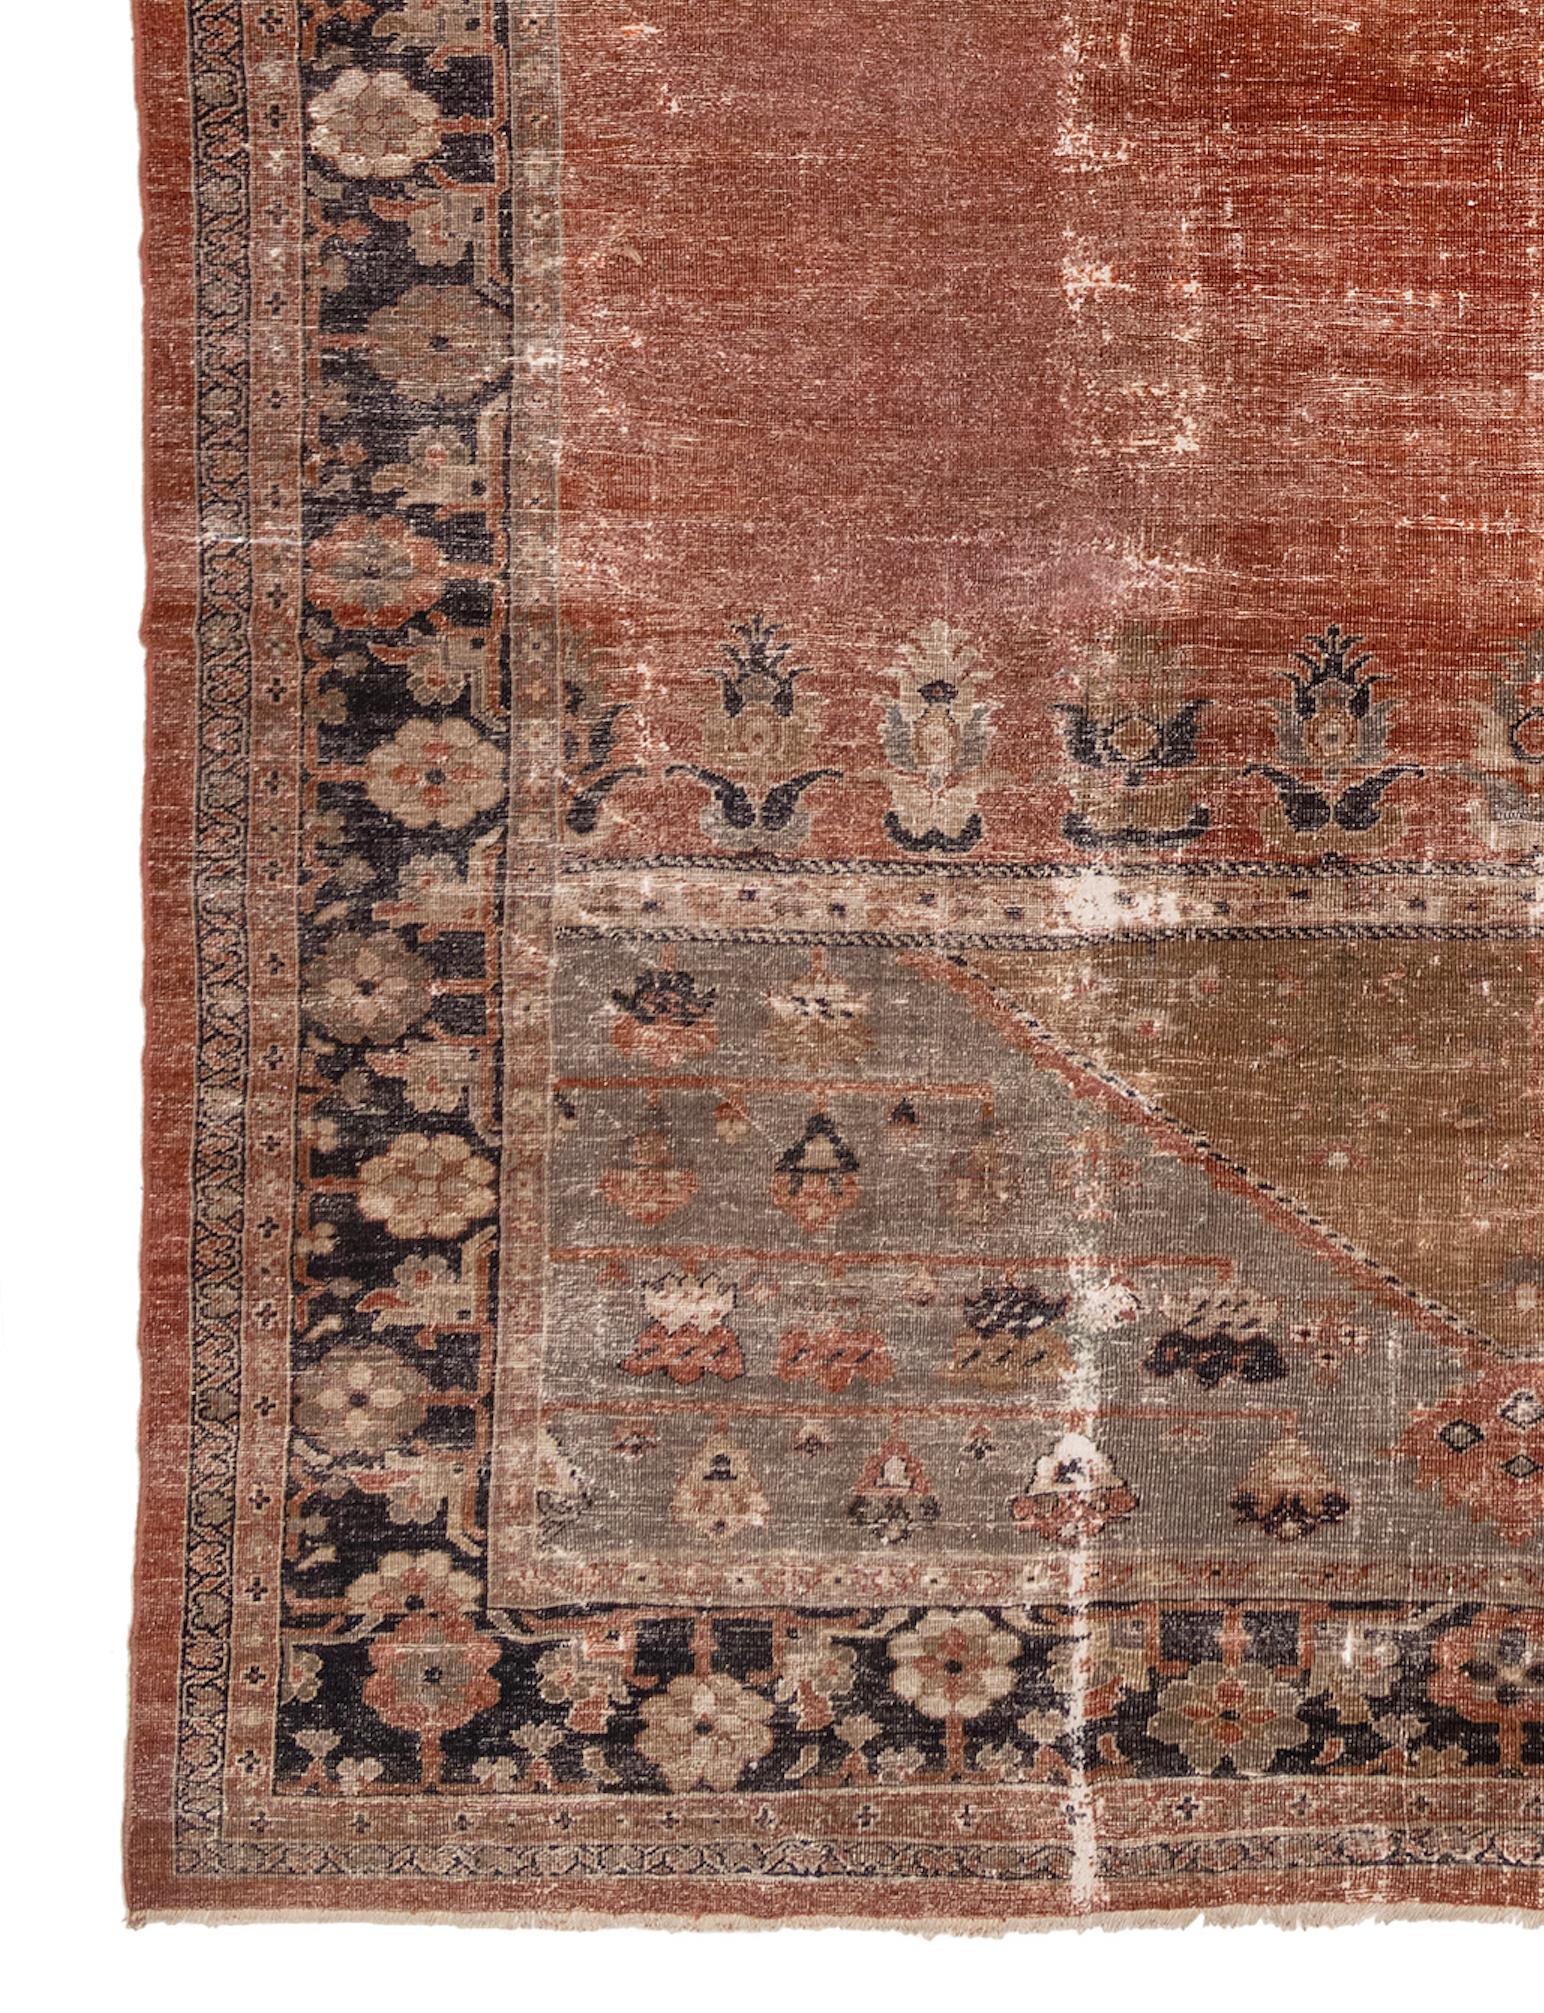 The Mahal rug stands as an incredibly vibrant and descriptive carpet, almost teetering onto the subject of an art form. A fine addition to any form sporting a unique approach and aesthetic among the many forms of Oriental and Persian rugs.